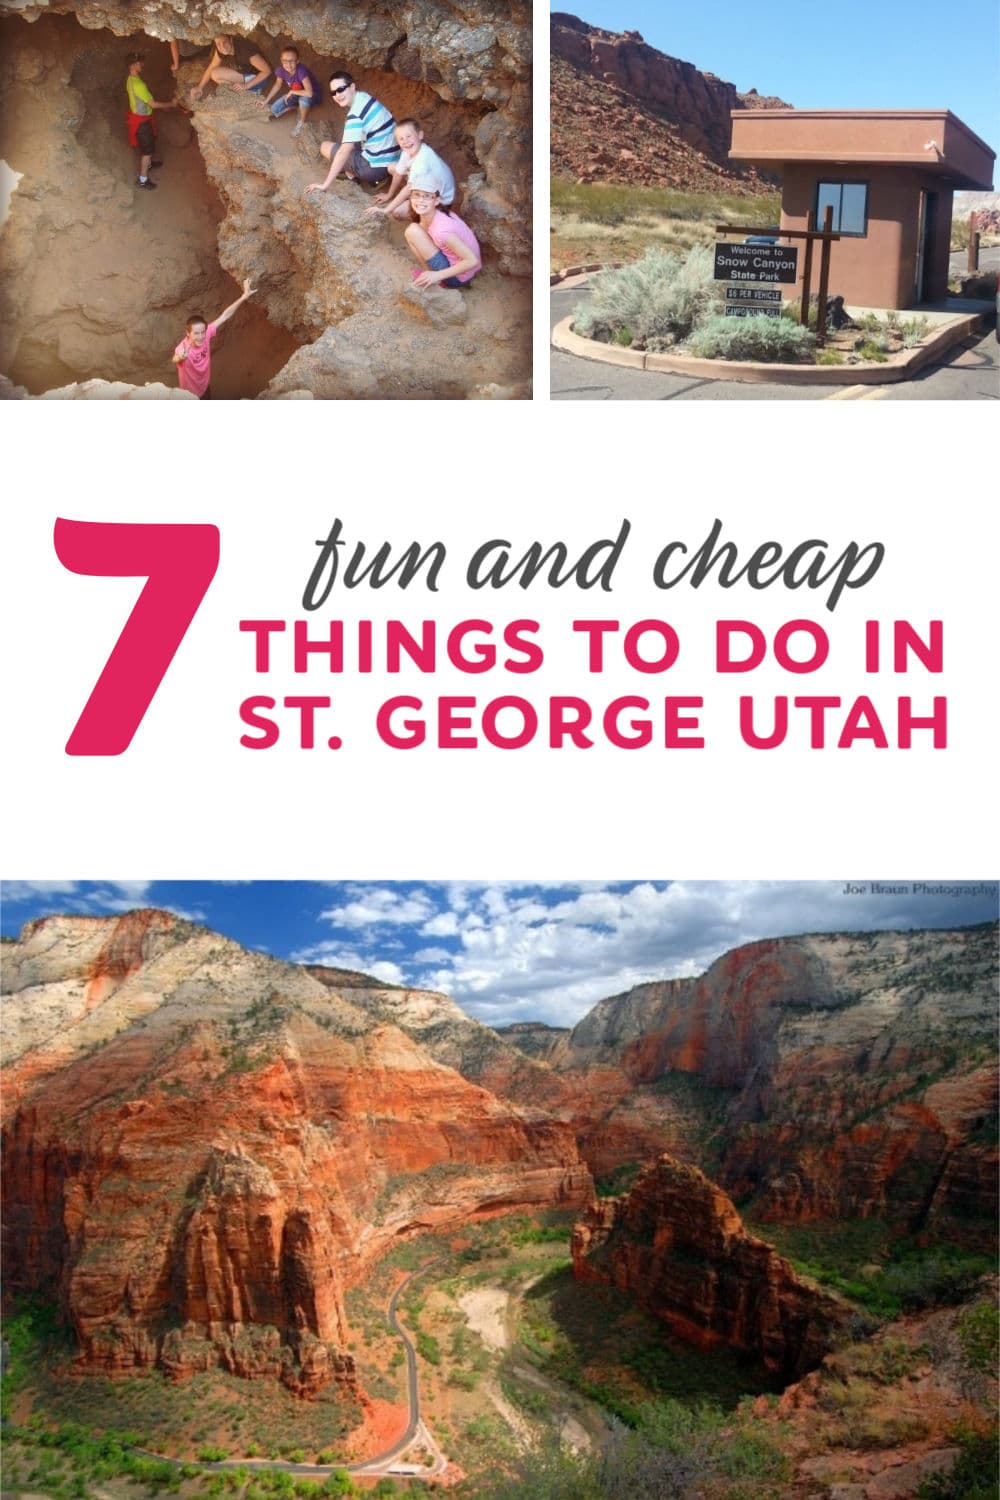 Things to do in Southern Utah